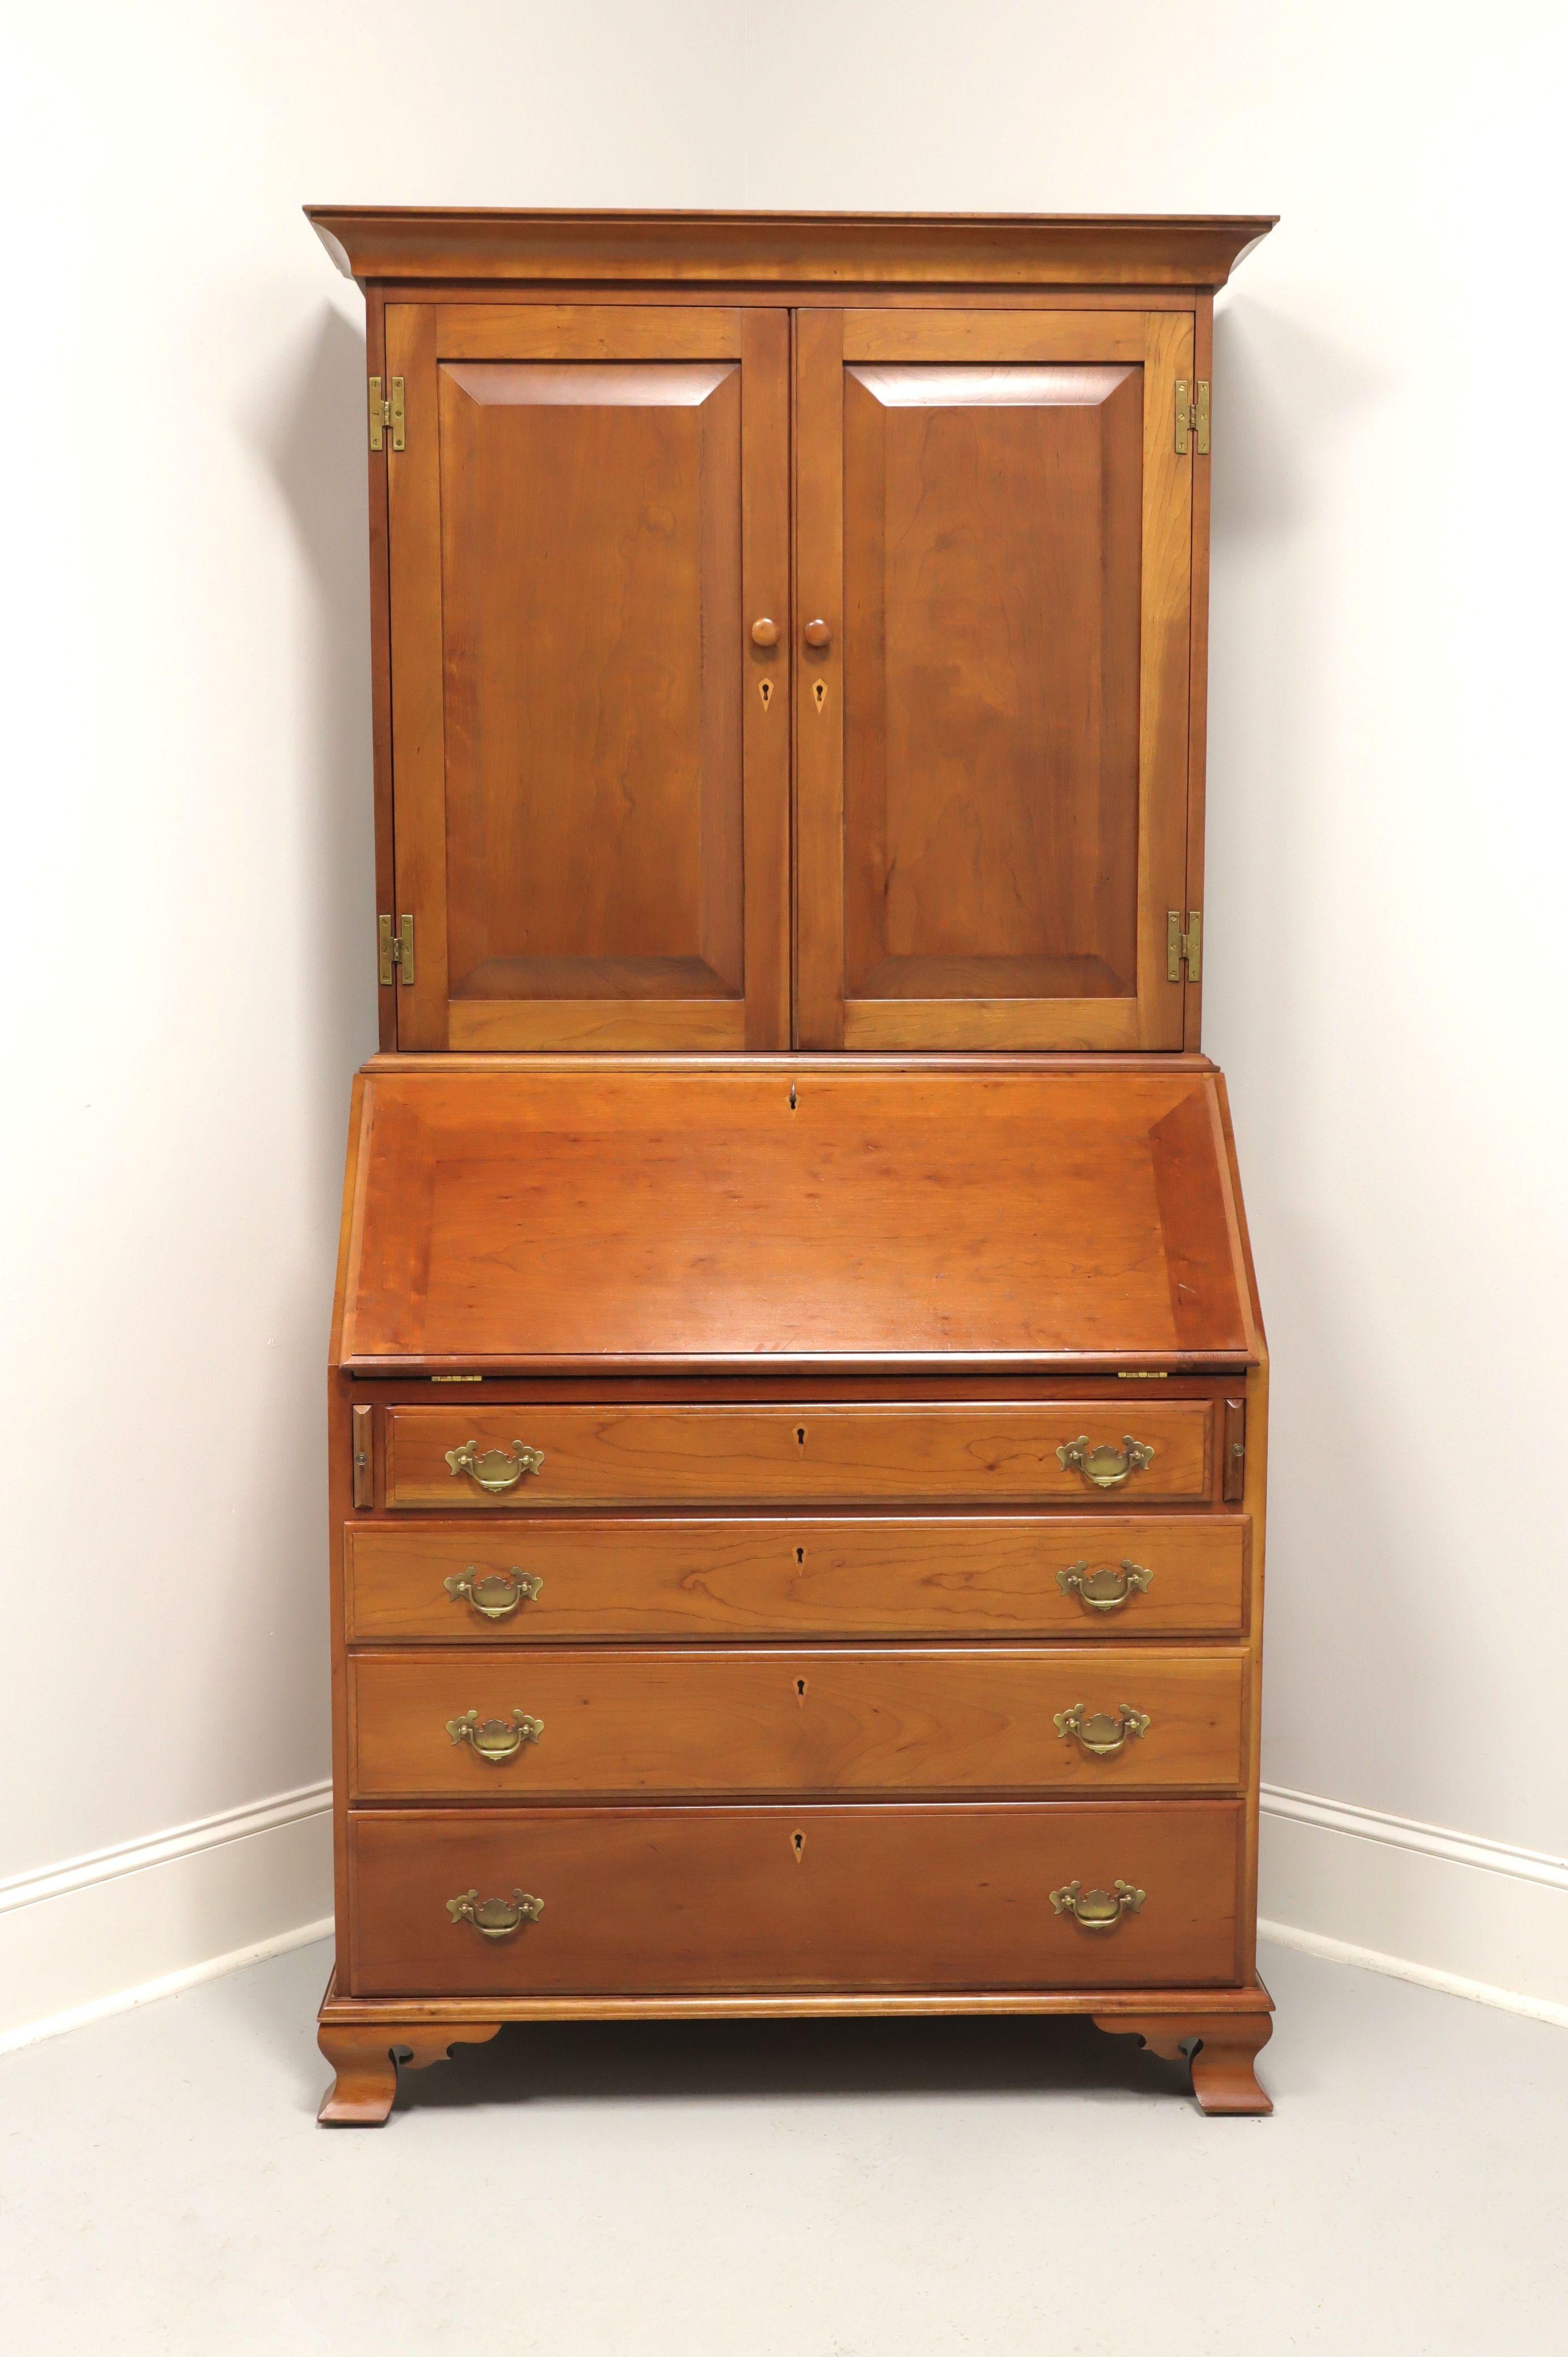 A Chippendale style secretary desk, no branding marks found, attributed to Benbow's. Solid cherry with brass hardware, crown moulding to top and ogee bracket feet. Upper blind bookcase has two doors with faux keyhole escutcheons that reveal two